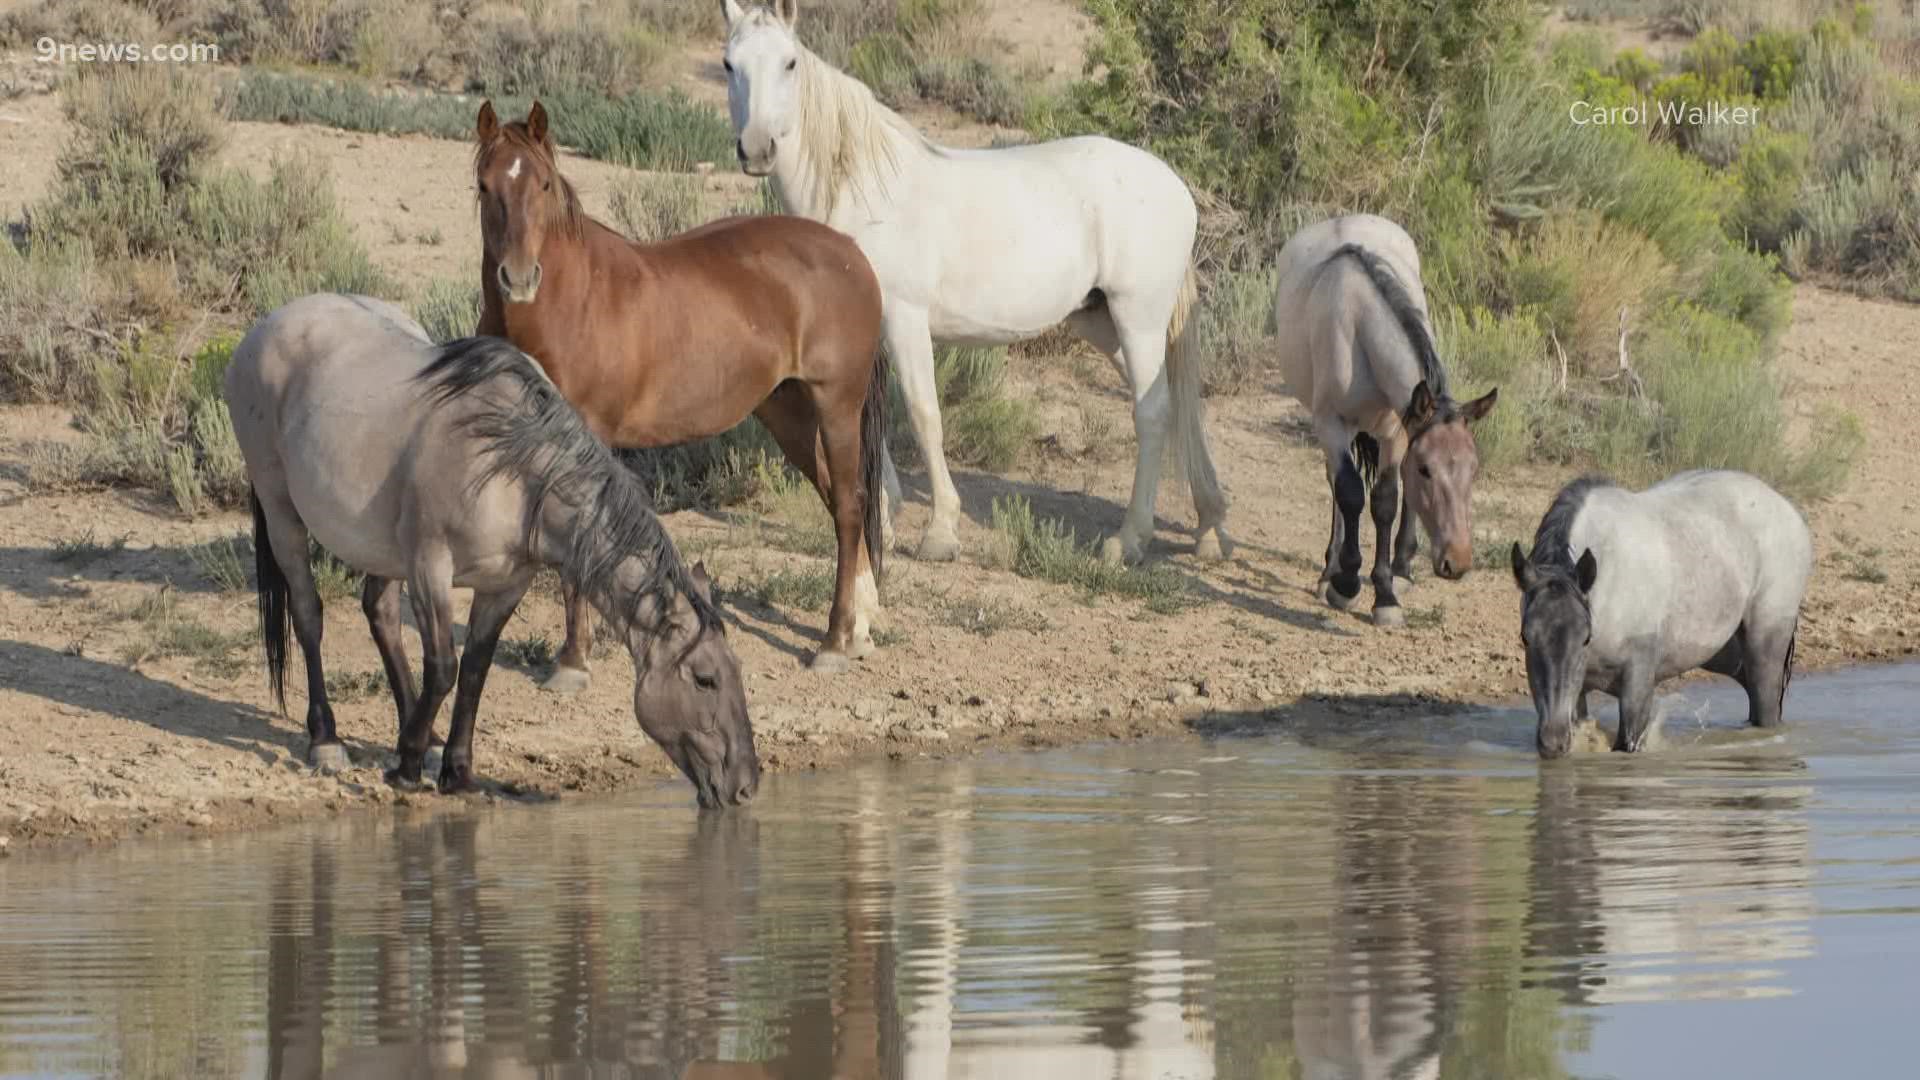 Helicopters drive the herd into trap zones. Horse advocates call it 'inhumane'.